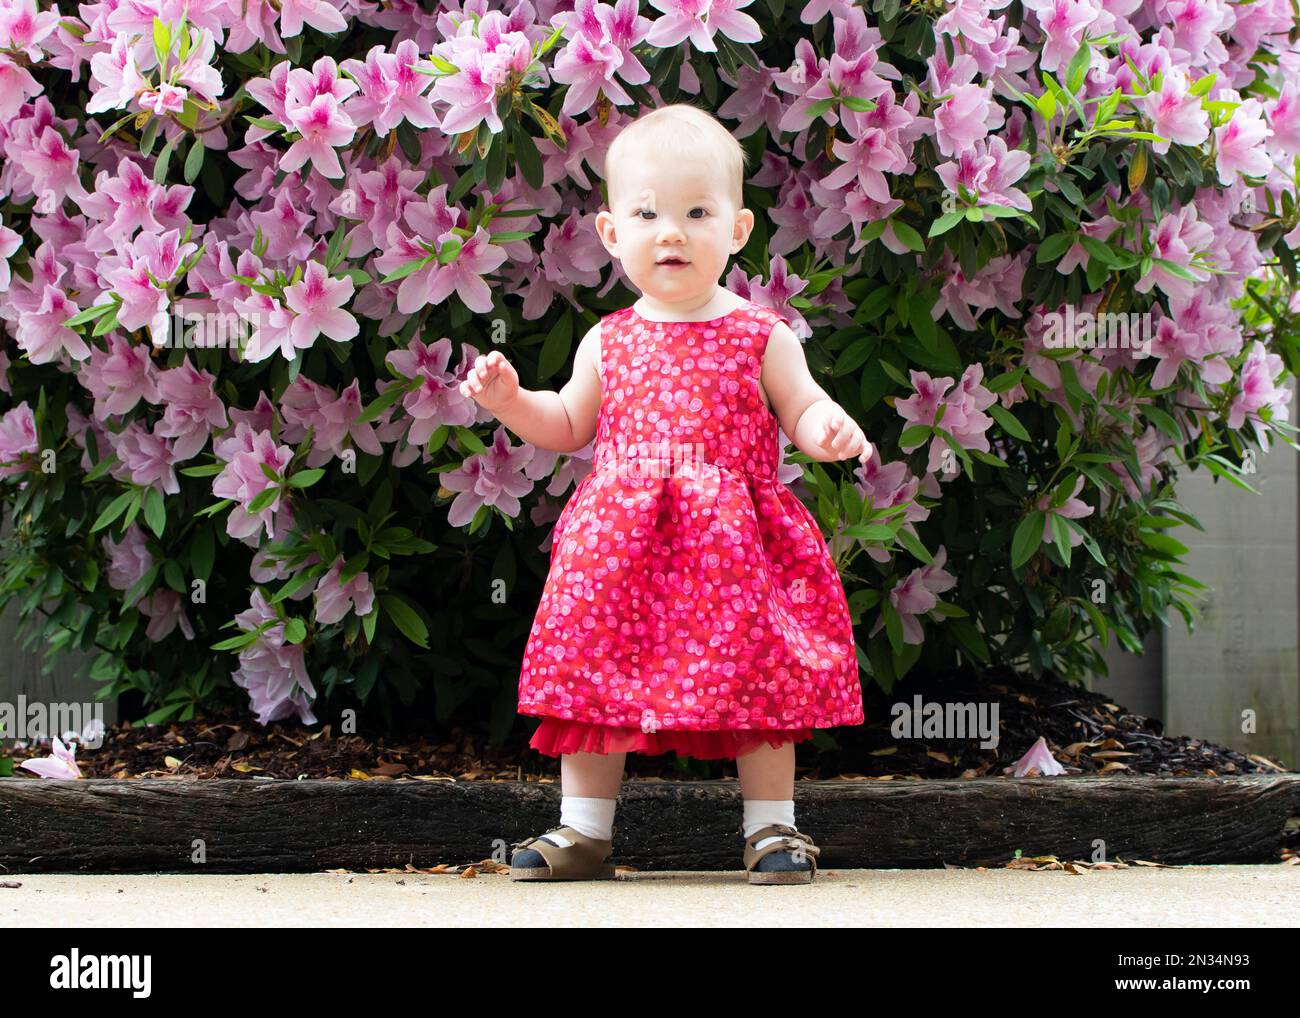 Cute baby girl in a dress learning how to walk. First steps of a baby near a bush with the pink flowers Stock Photo